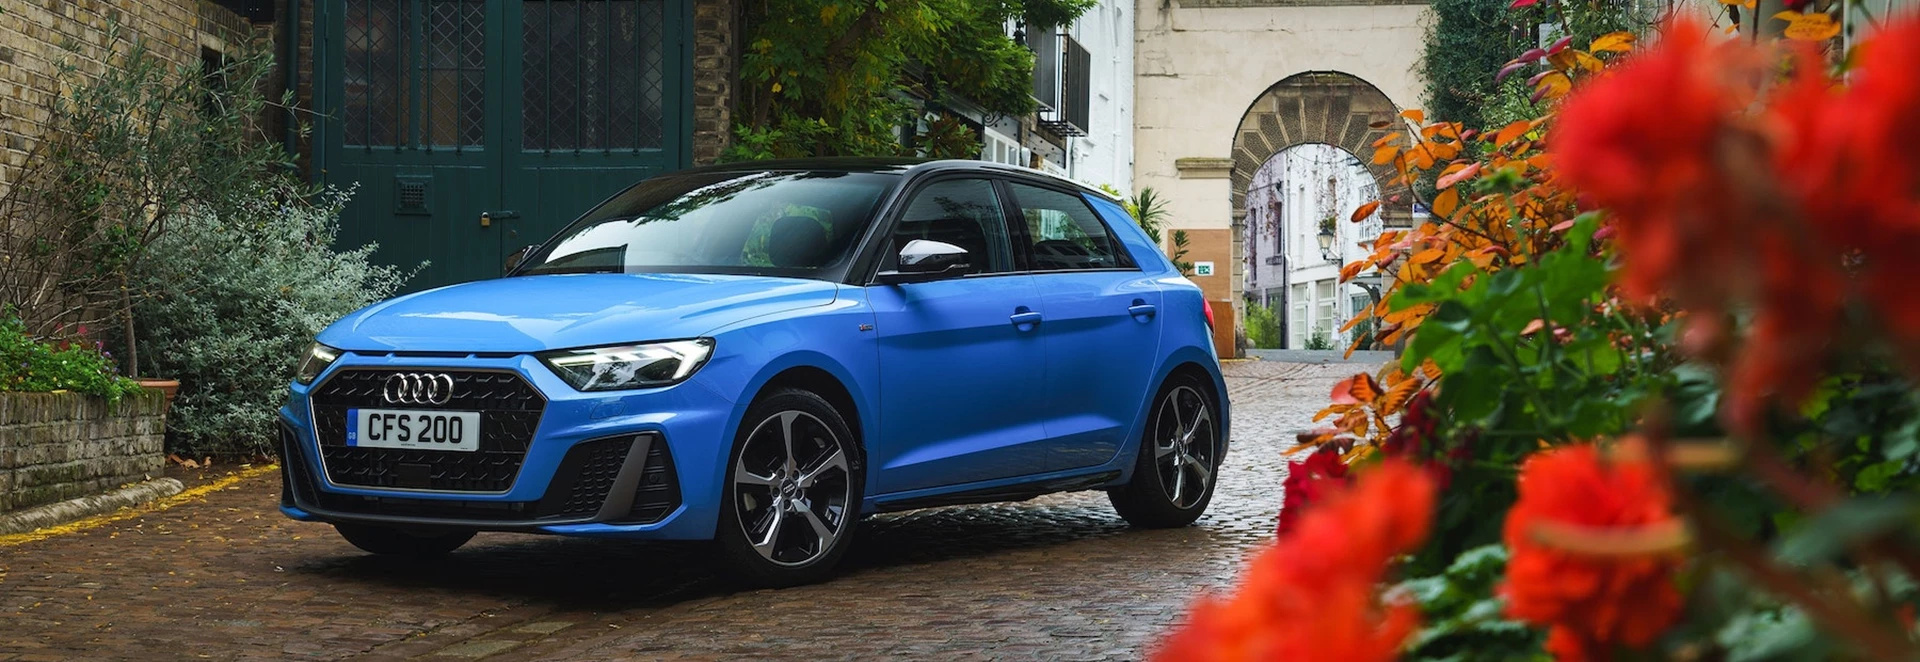 Audi A1 S line Competition 2020 review